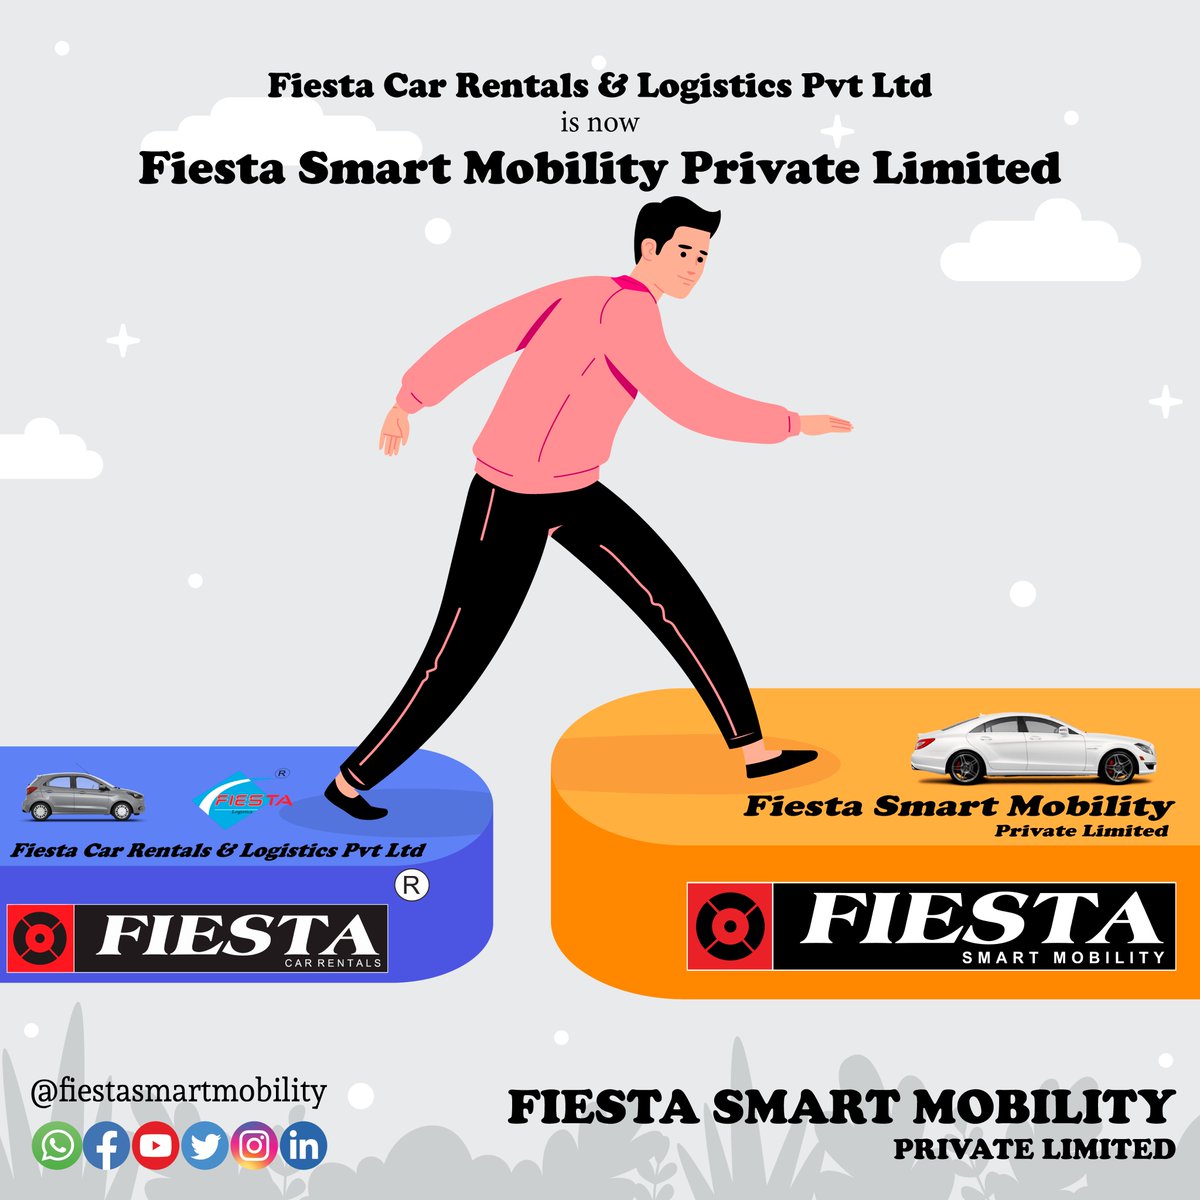 Introducing Fiesta Smart Mobility Private Limited - Your Partner in Next-Gen Transportation Solutions! 🚗💨 Let's drive towards a smarter, greener tomorrow together! #FiestaSmartMobility #NextGenTransportation #SustainableMobility #Innovations #futureoftransport♻️